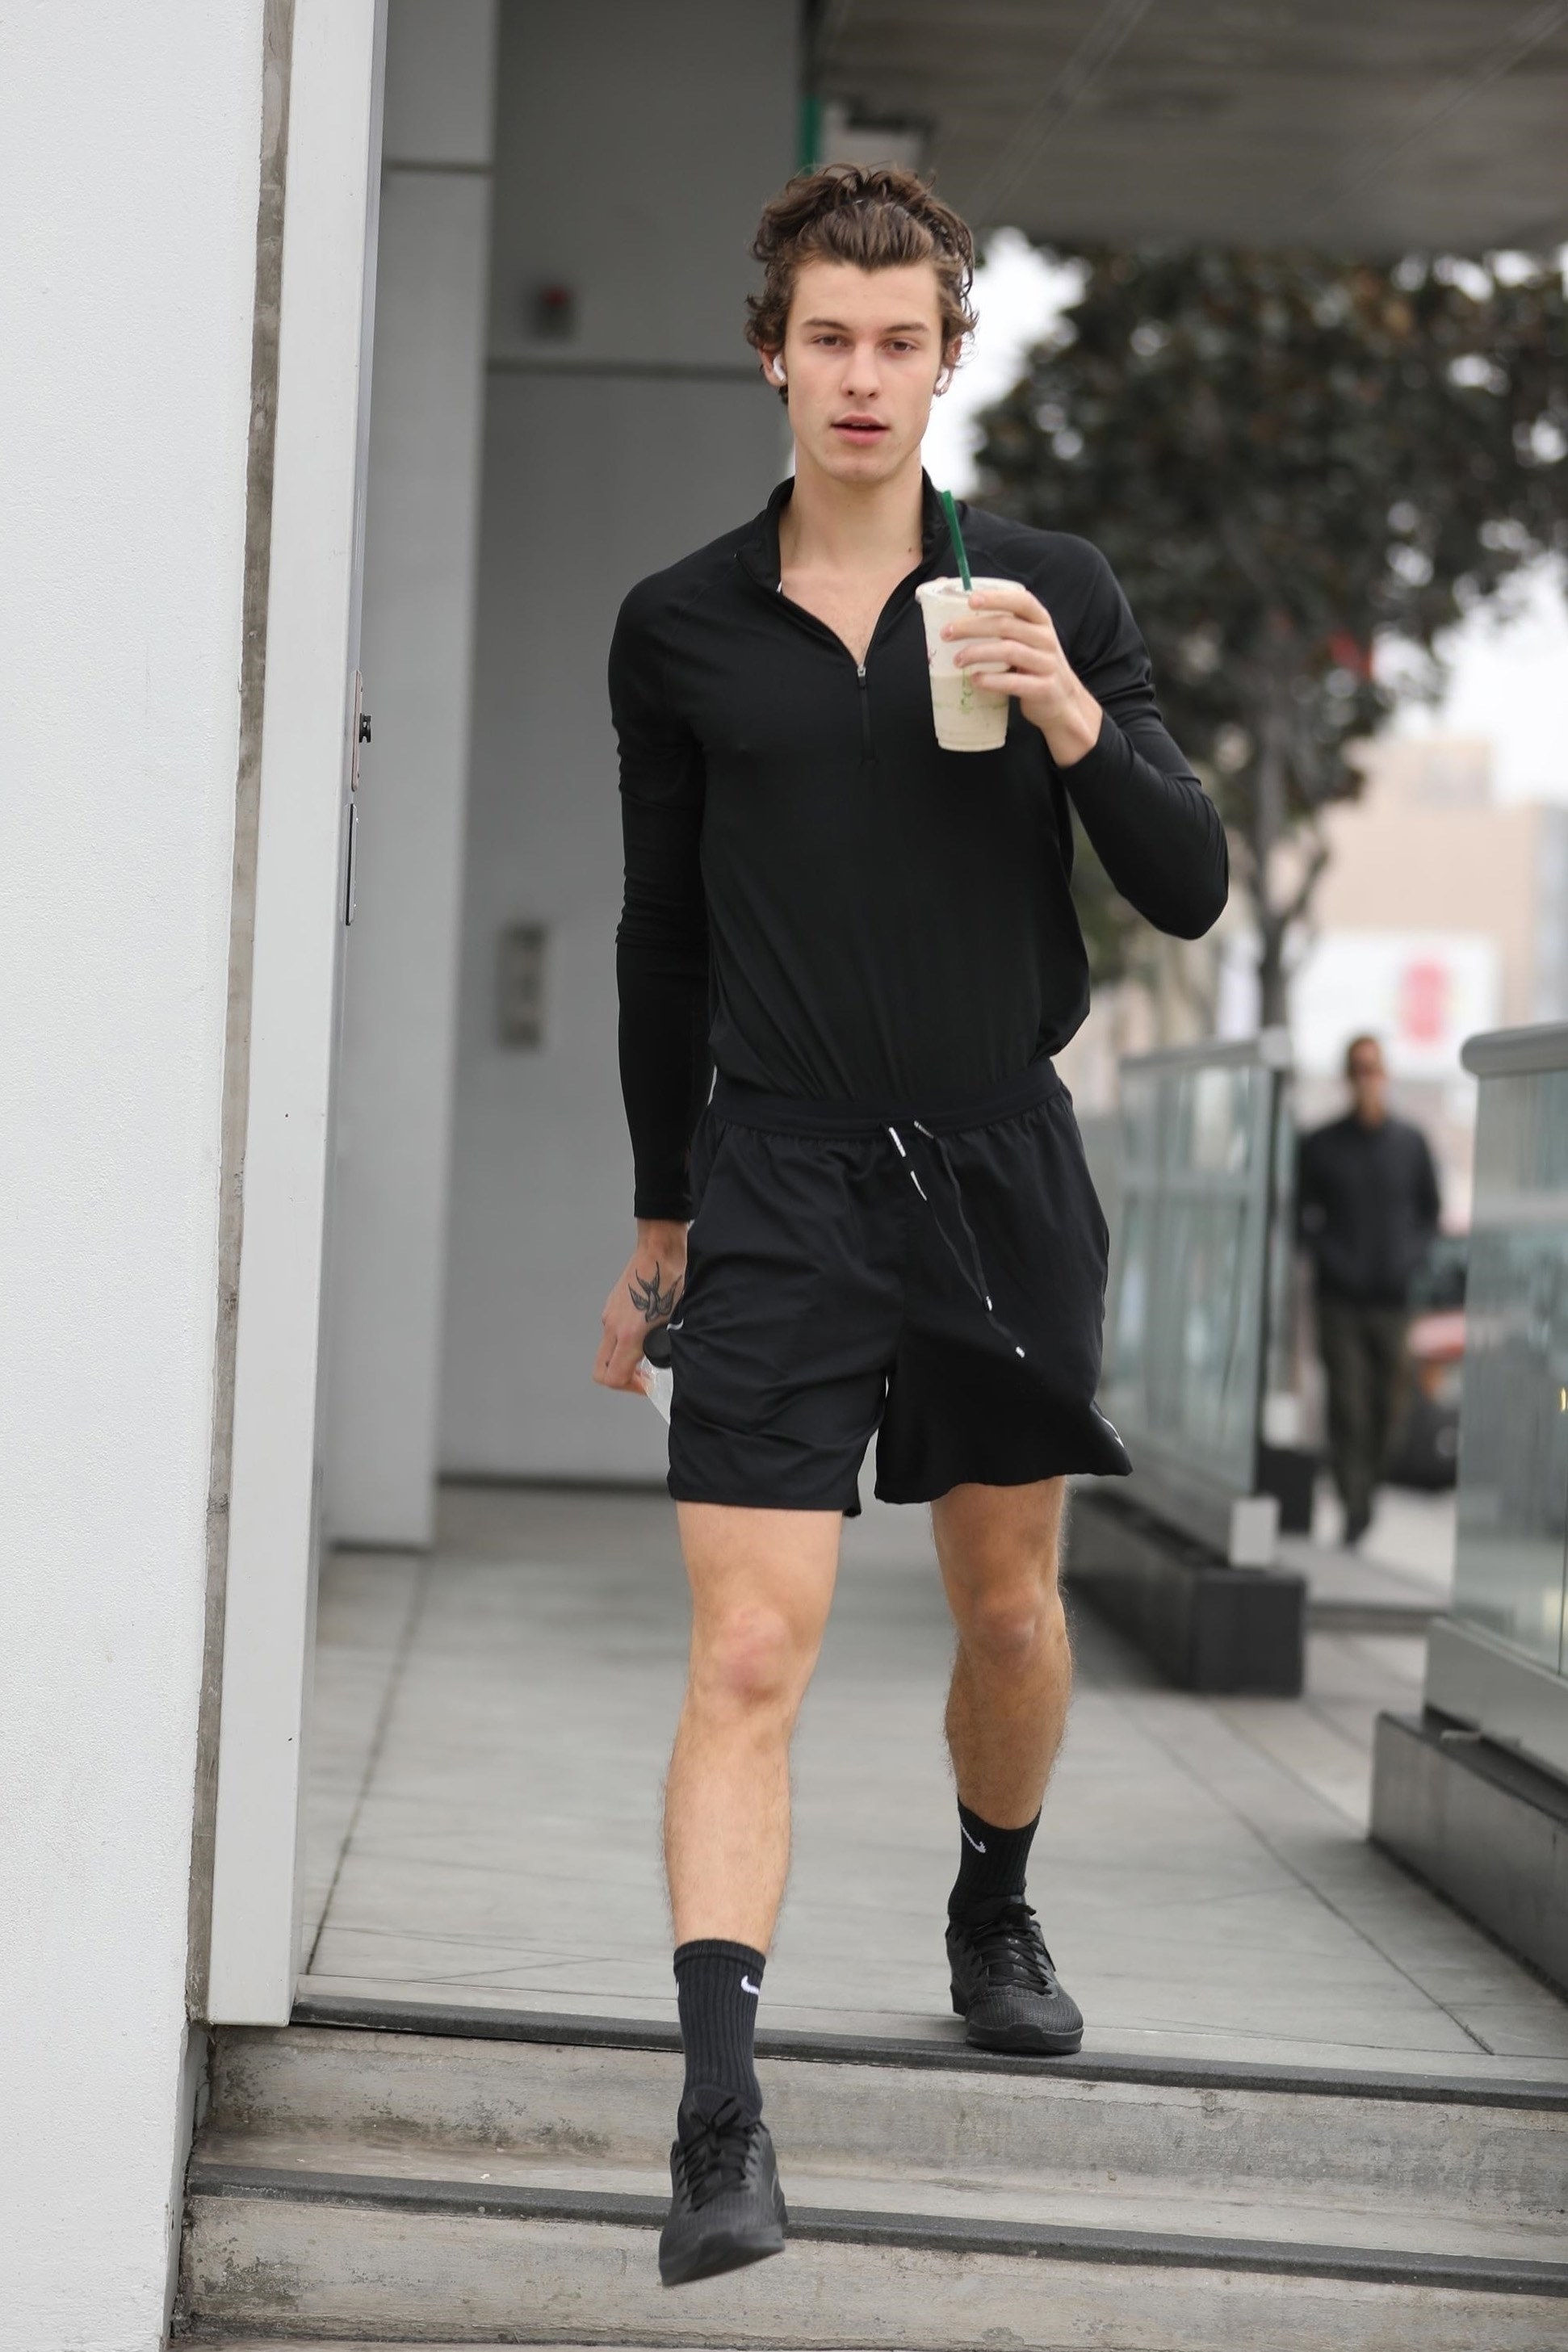 13. Shawn Mendes looked good post-gym. 